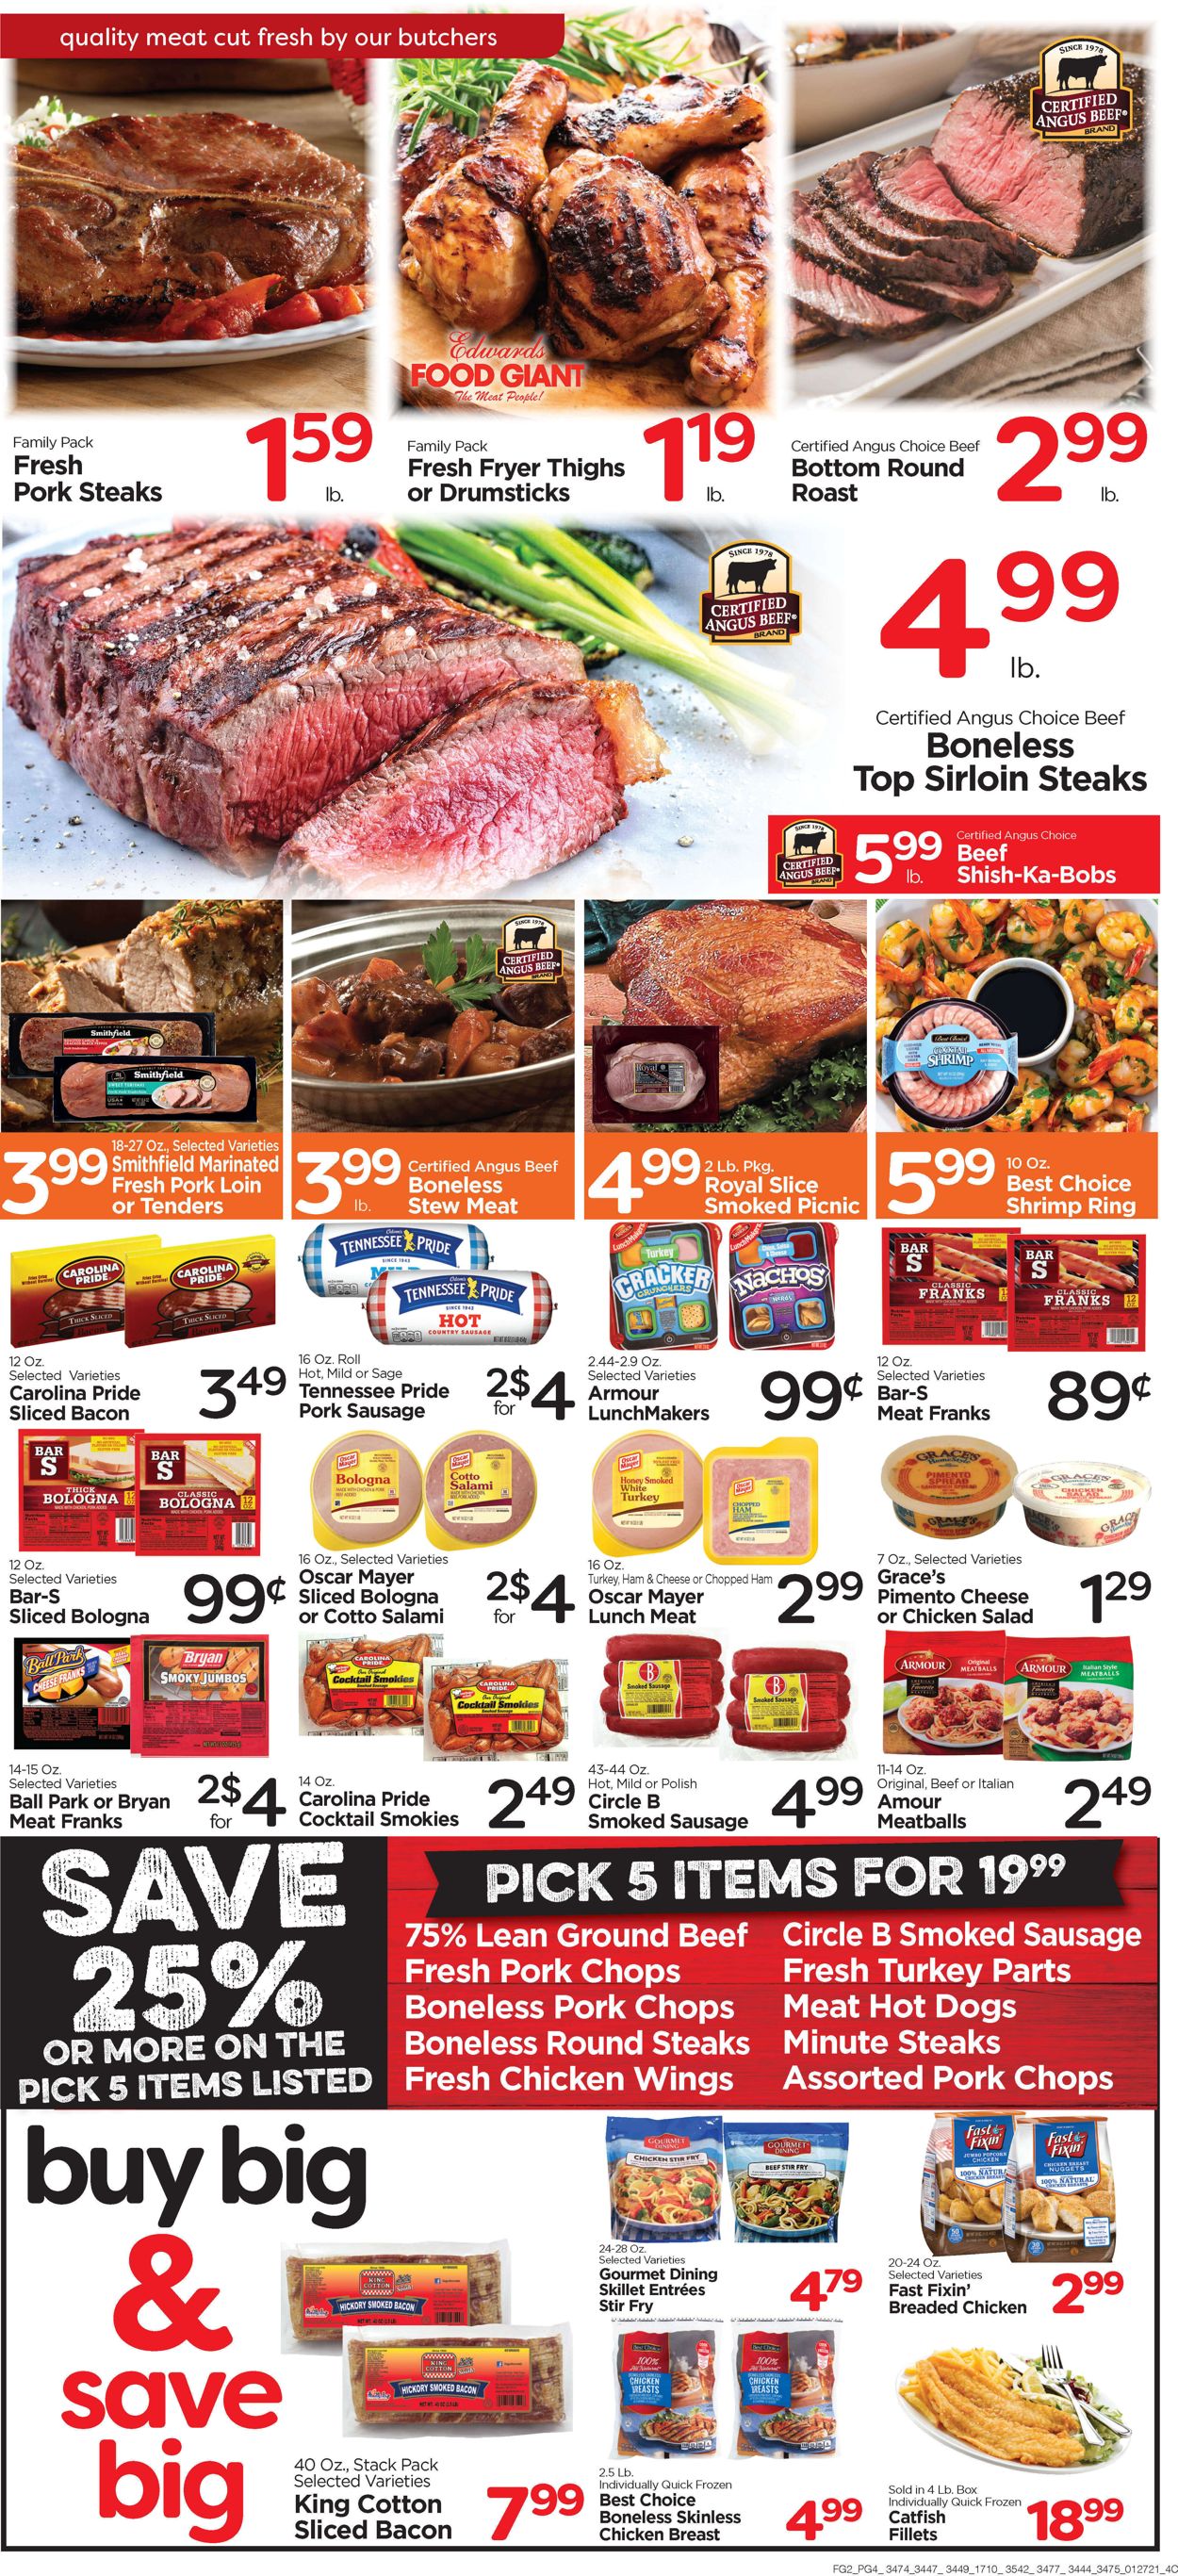 Catalogue Edwards Food Giant from 01/27/2021